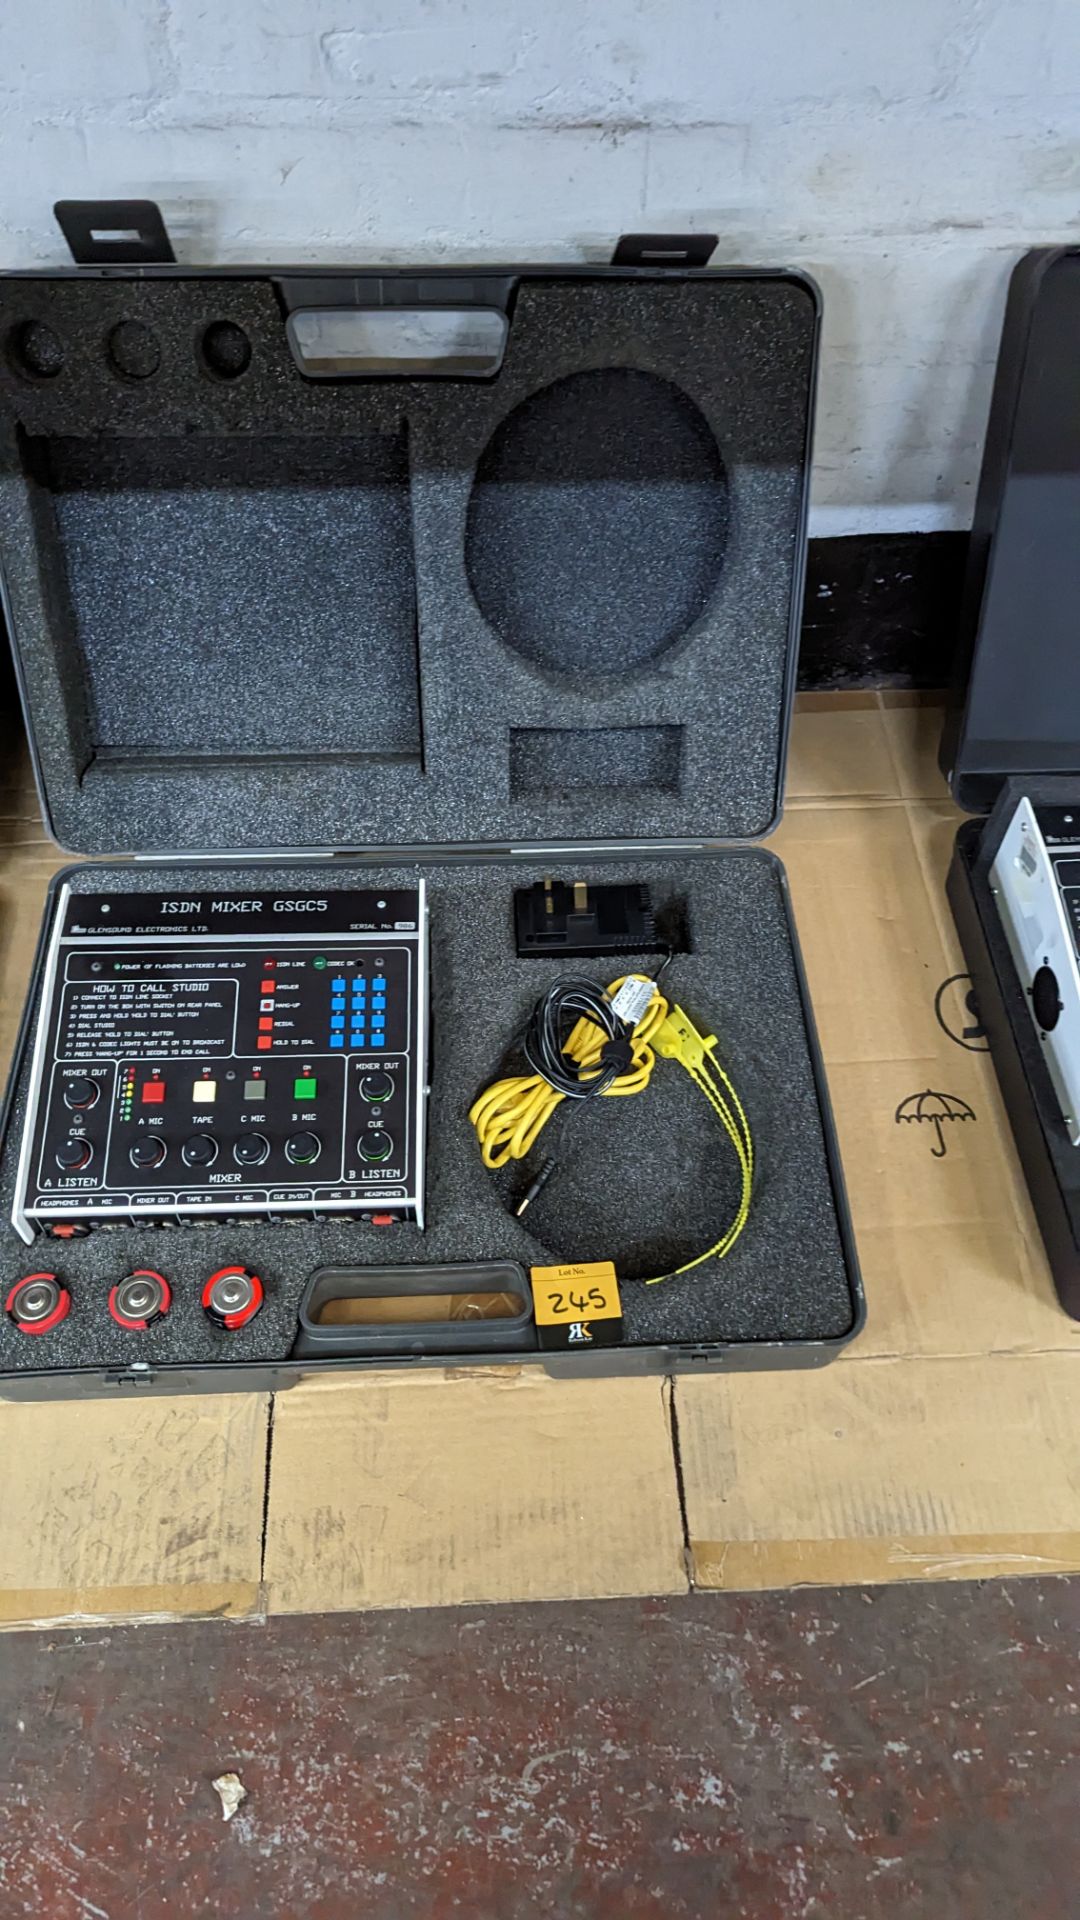 Glensound ISDN mixer, model GSGC5. Includes carry case and ancillaries - Image 8 of 8